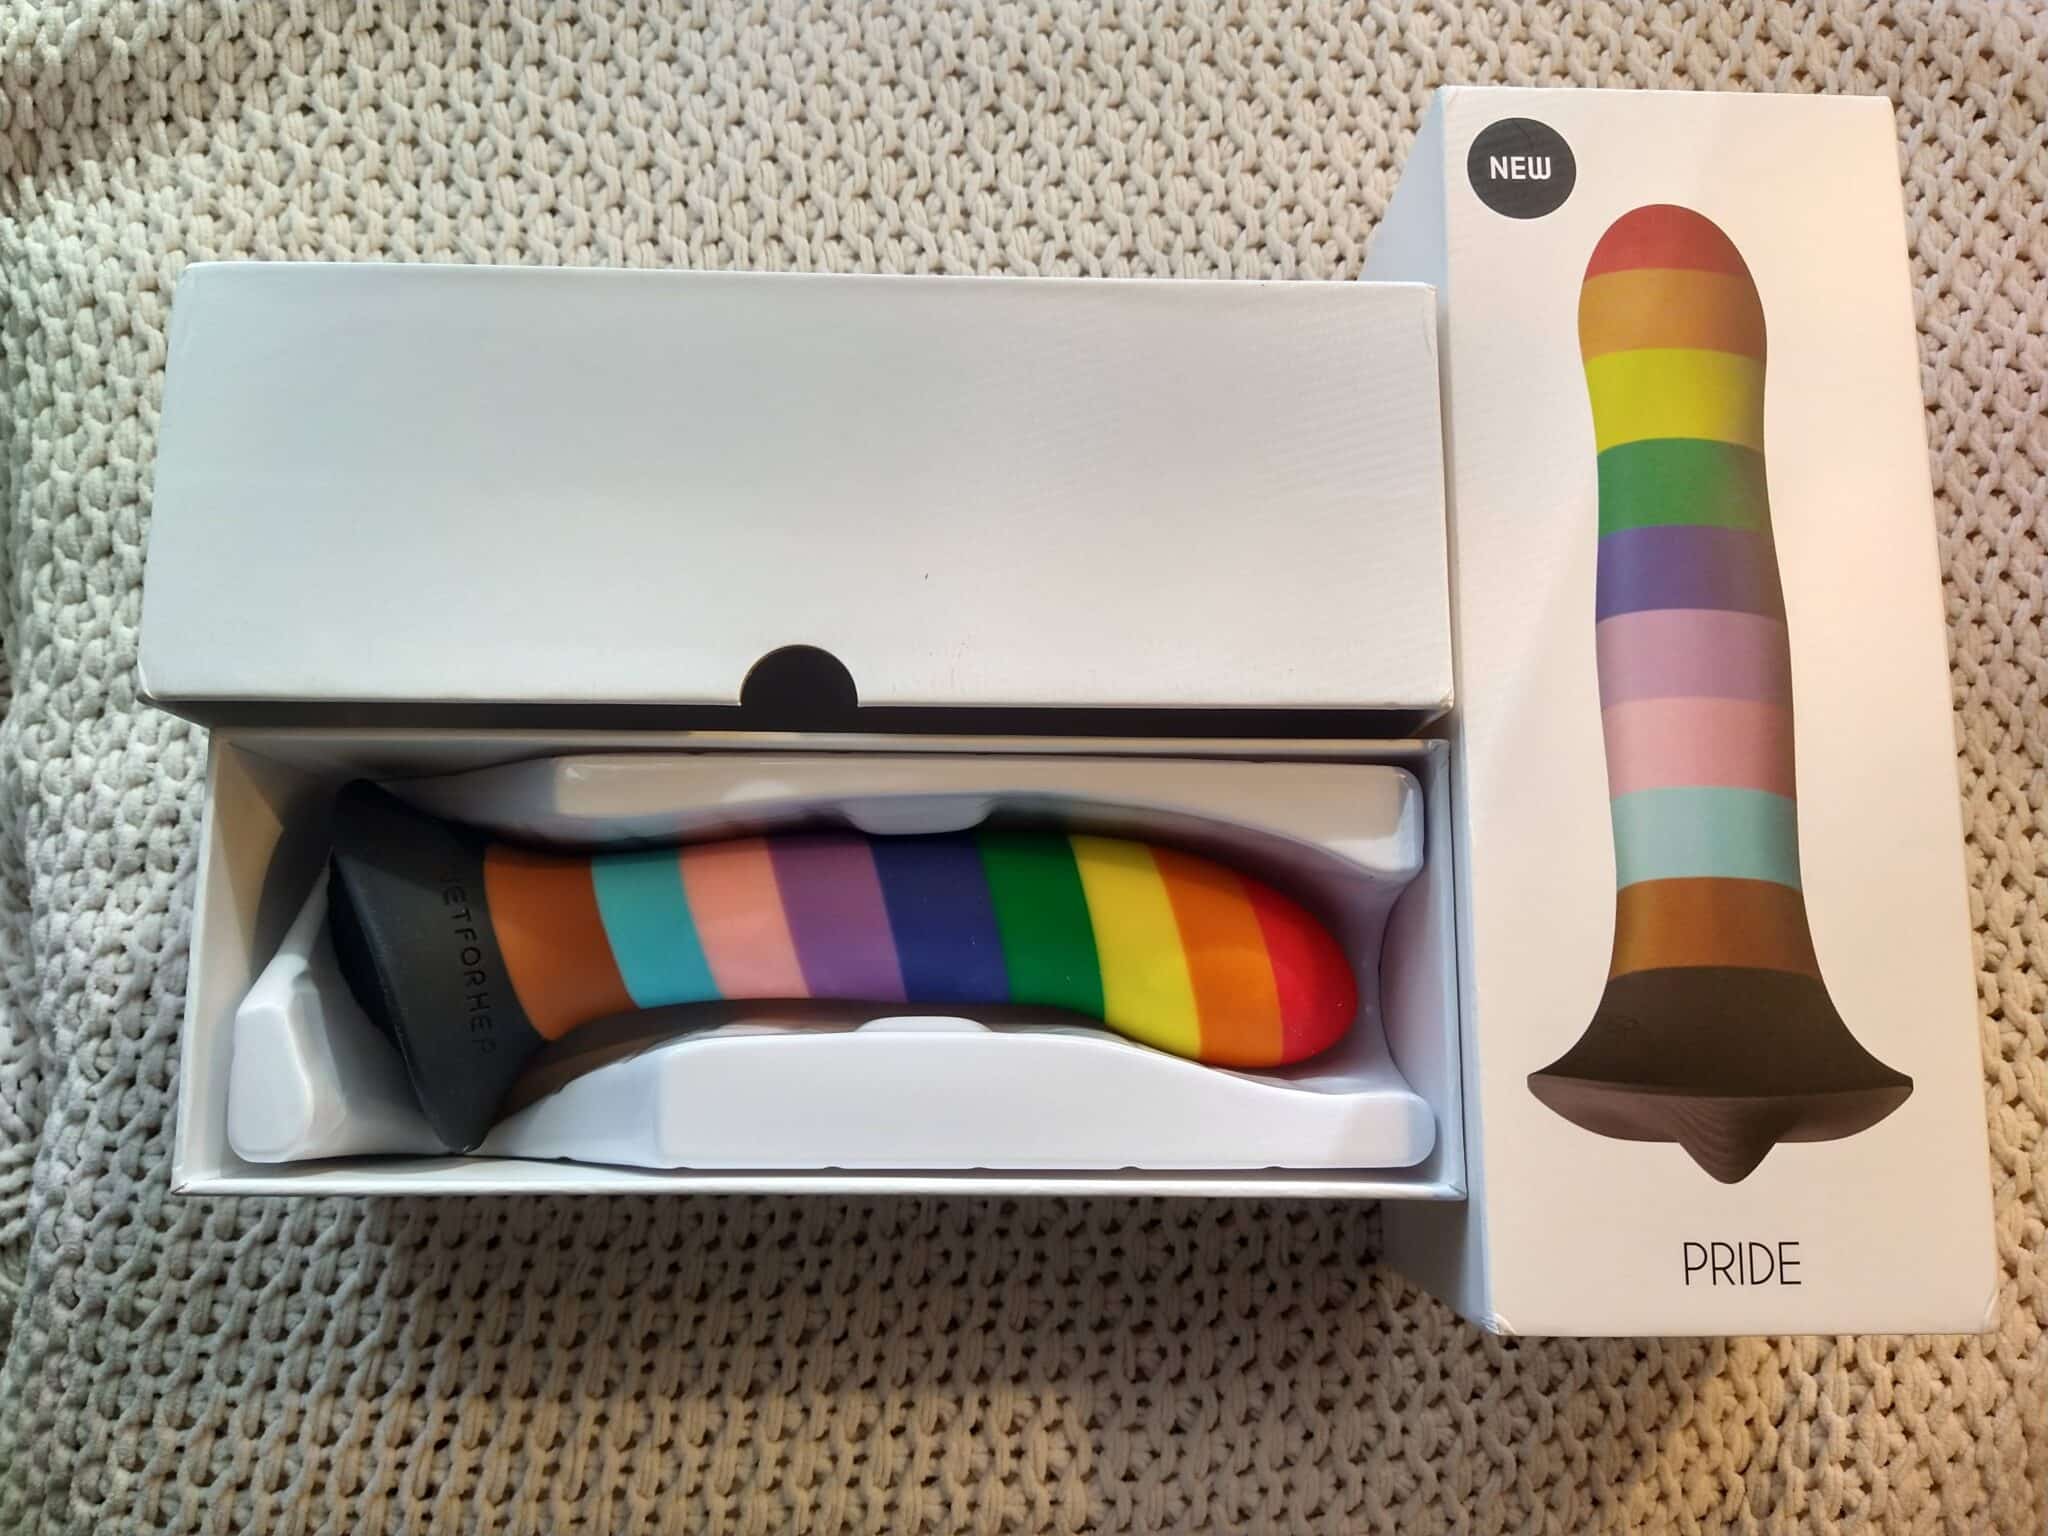 Wet For Her Pride Fusion Strap-On Dildo The Unboxing Experience: A Review